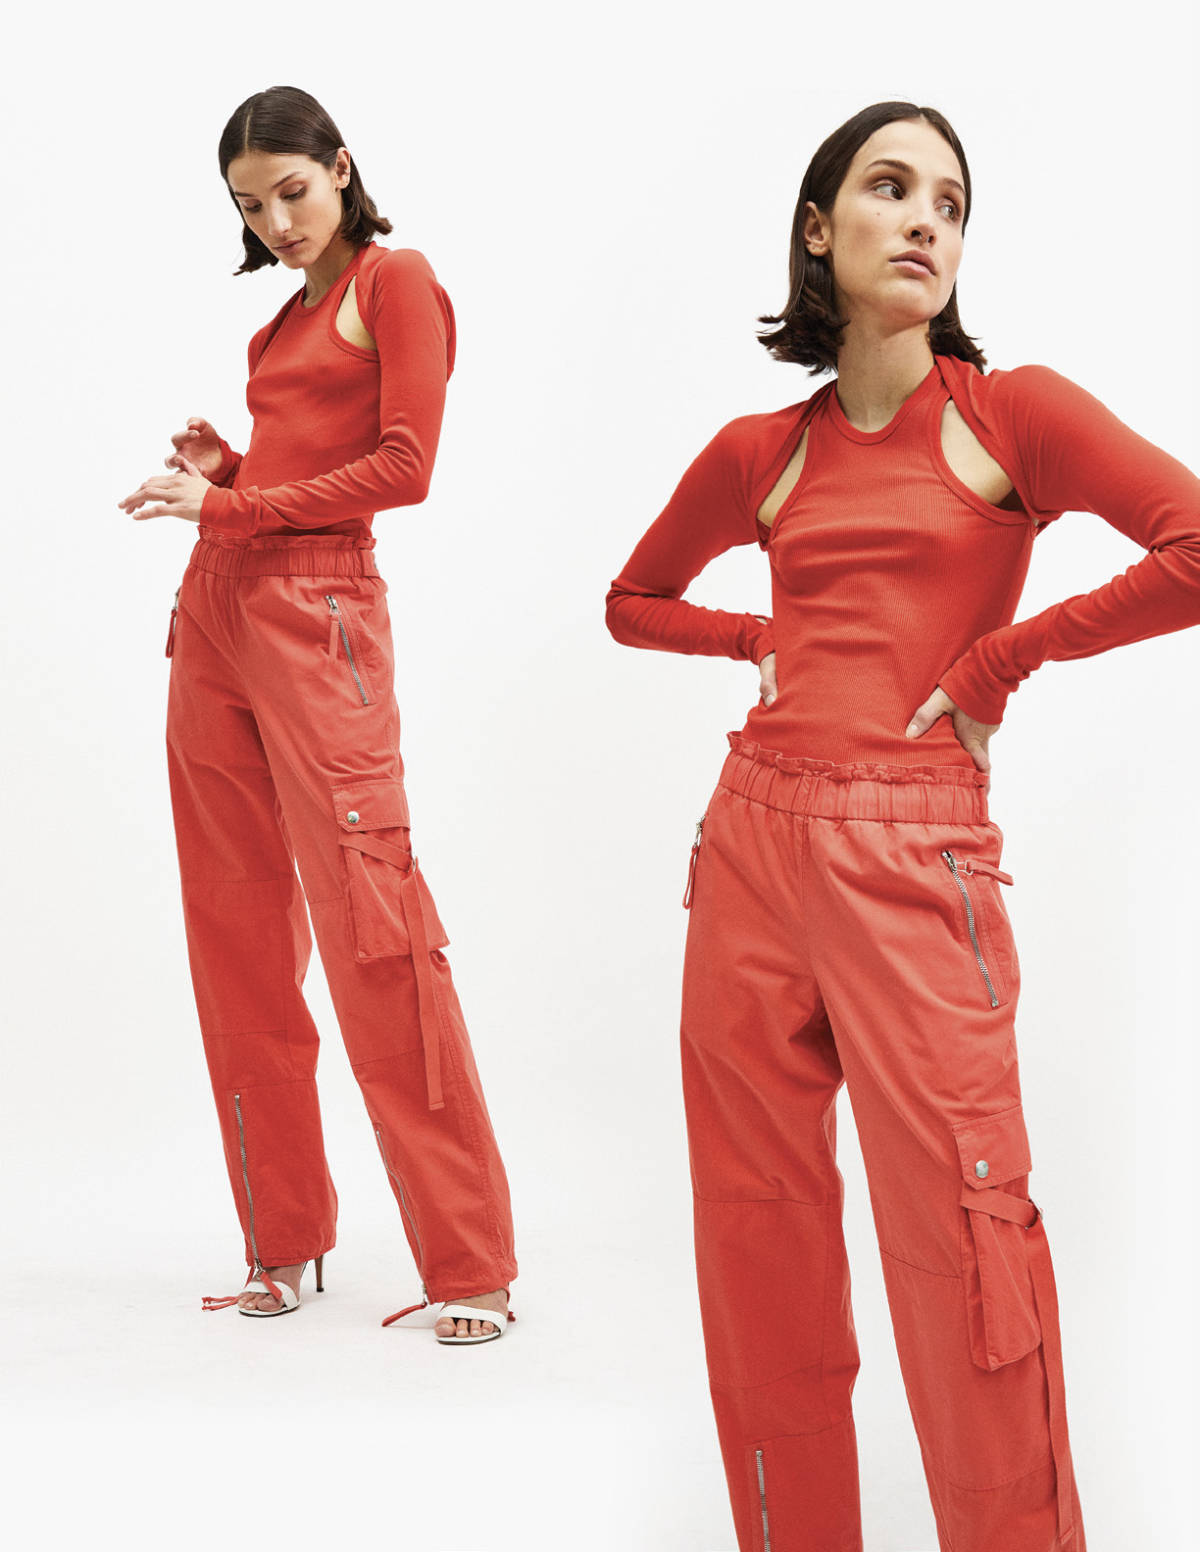 Helmut Lang Presents Its Pre-Fall 2021 Collection